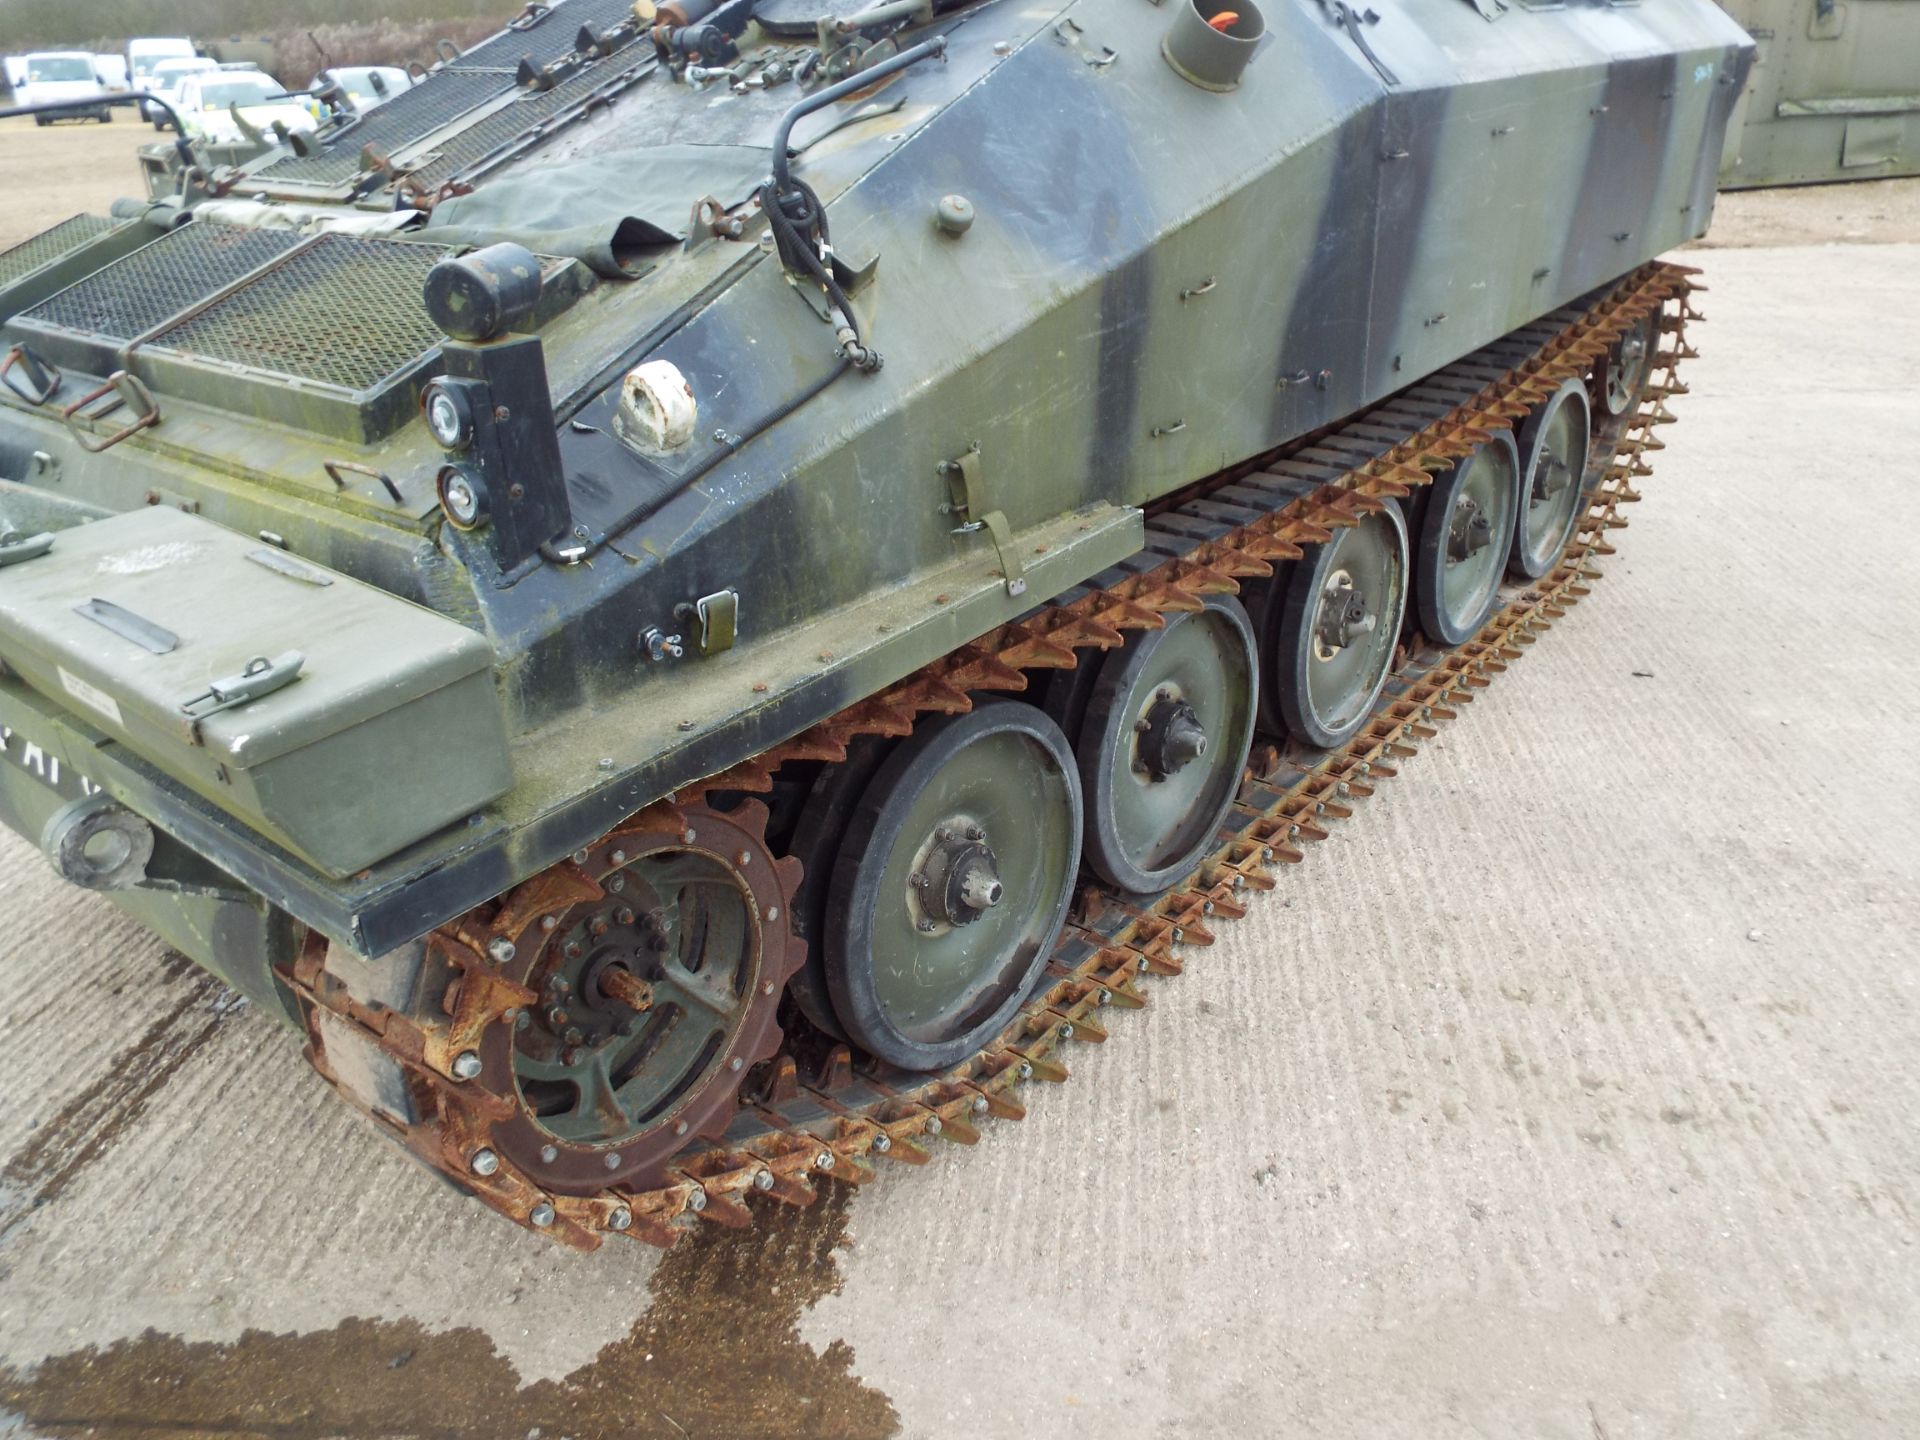 Dieselised CVRT (Combat Vehicle Reconnaissance Tracked) Spartan Armoured Personnel Carrier - Image 10 of 28